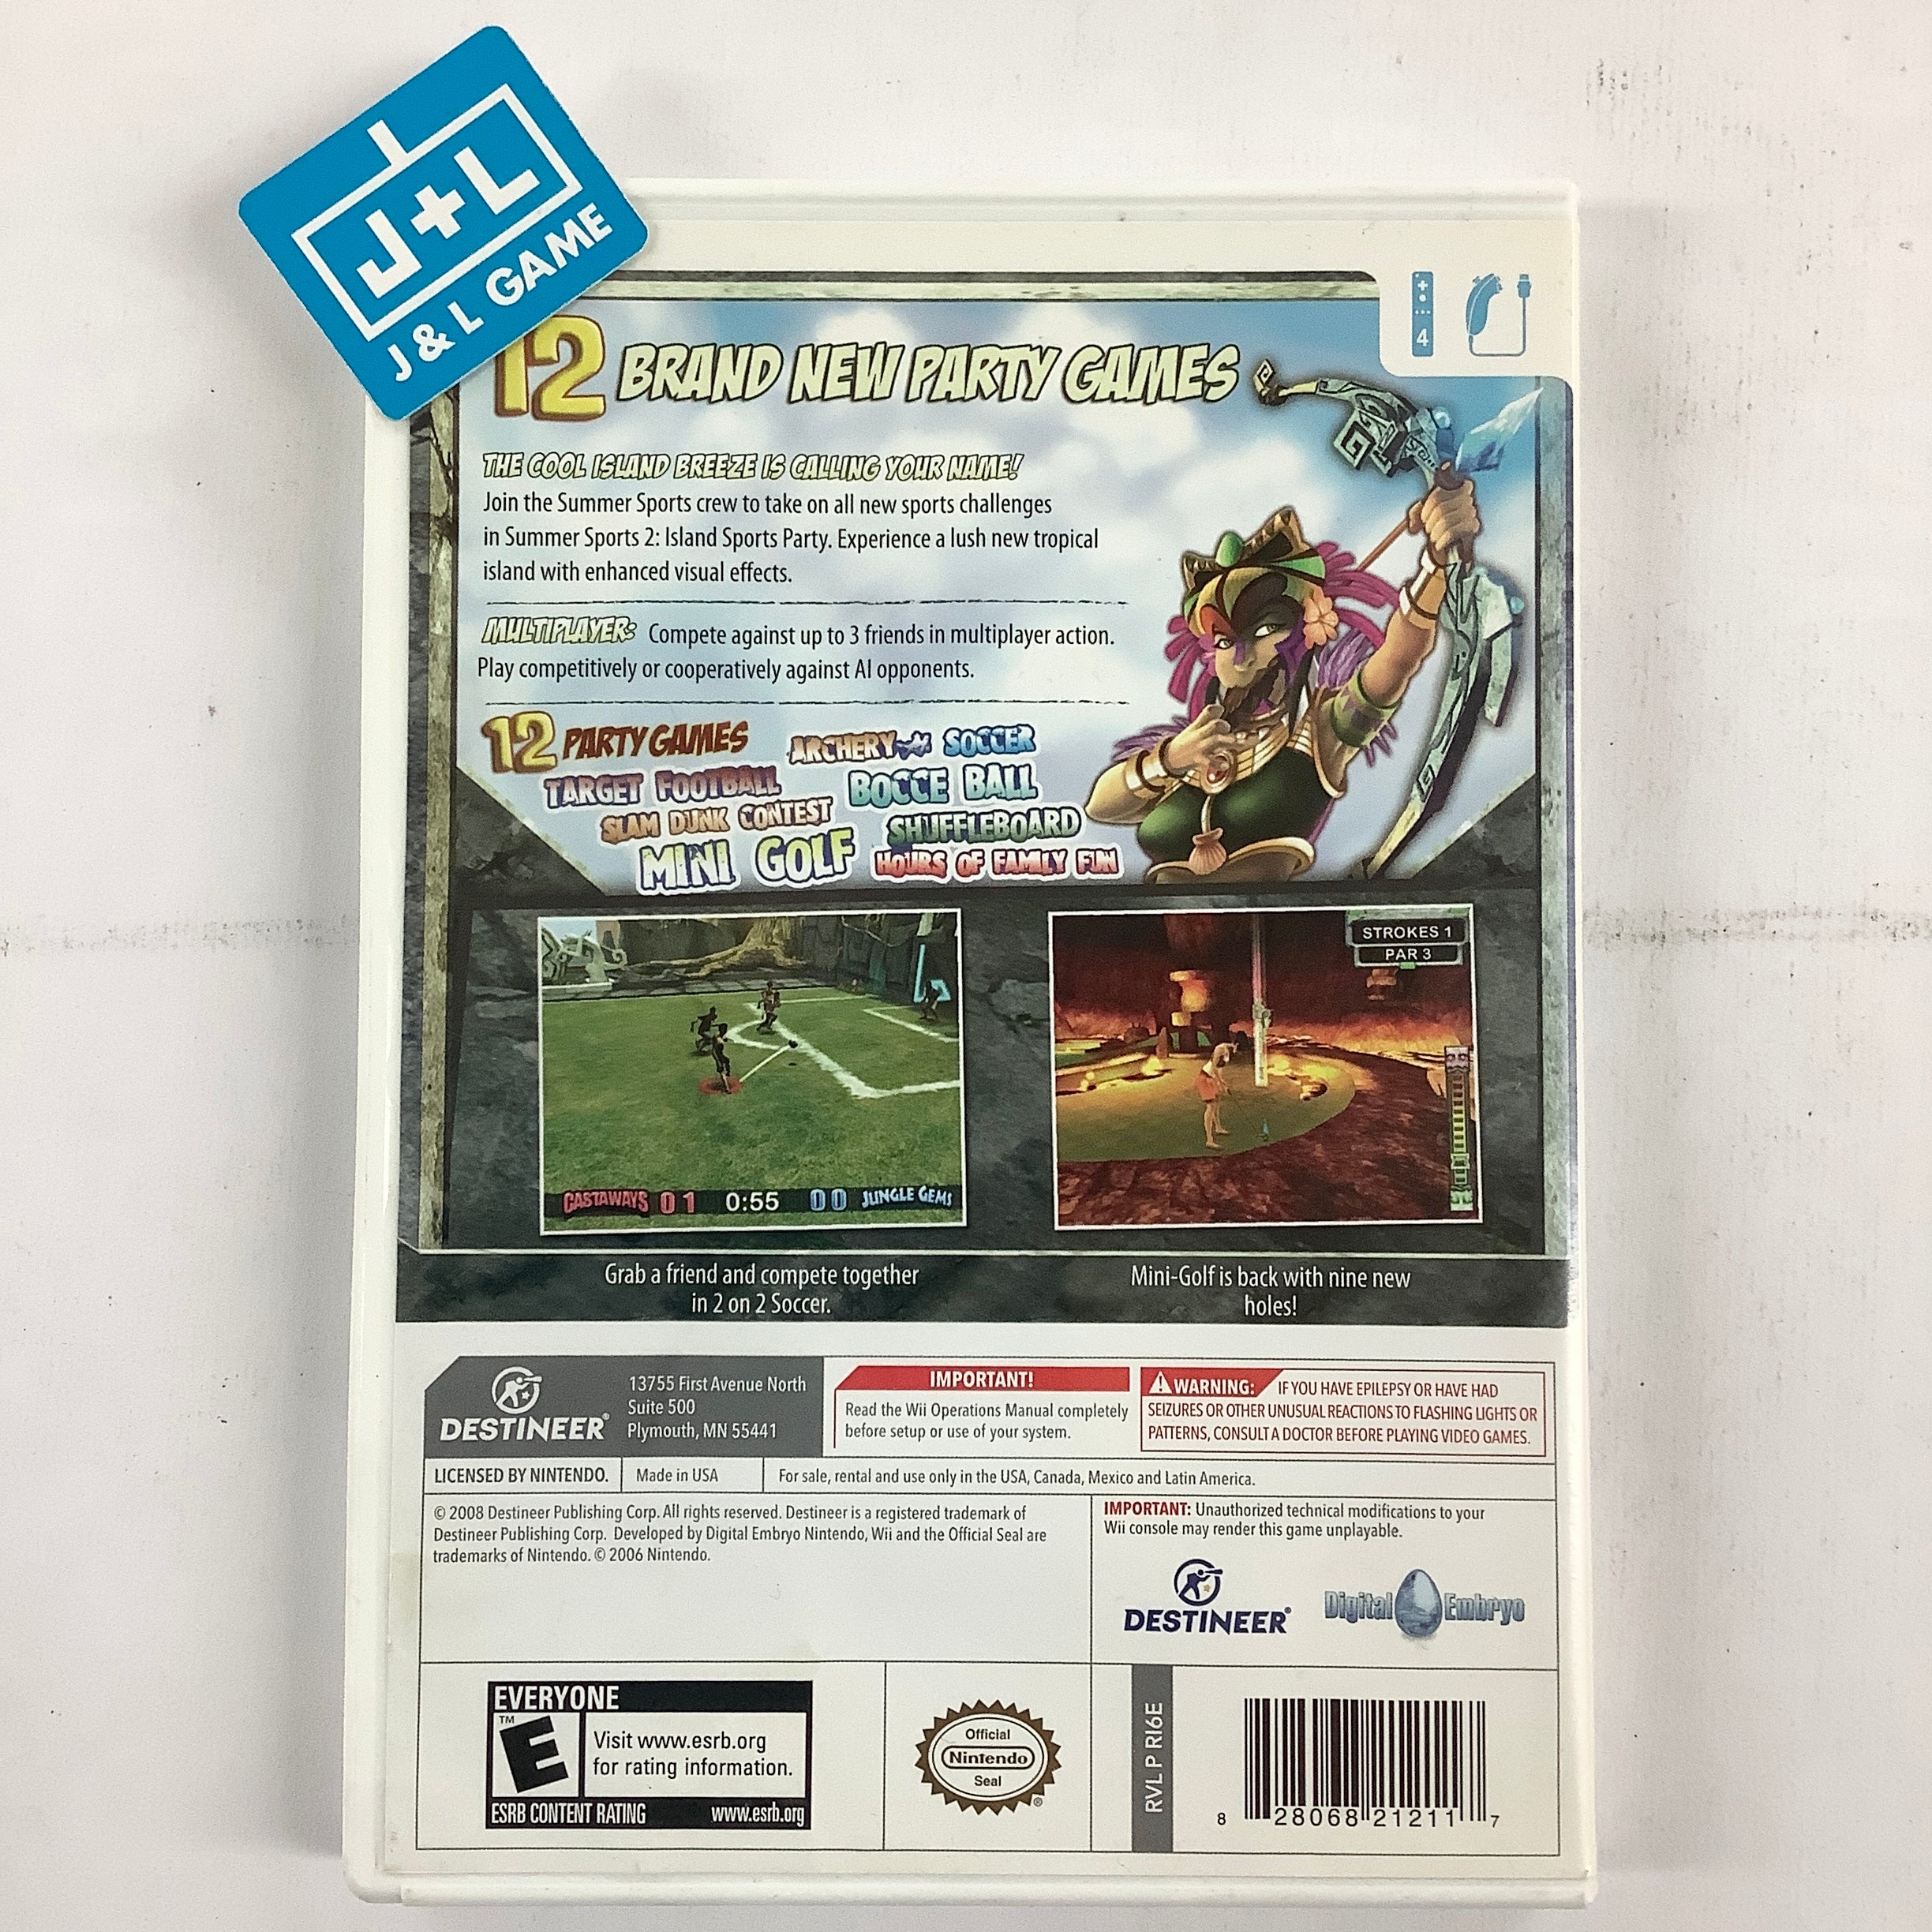 Island Sports Party: Summer Sports 2 - Nintendo Wii [Pre-Owned] Video Games Destineer   